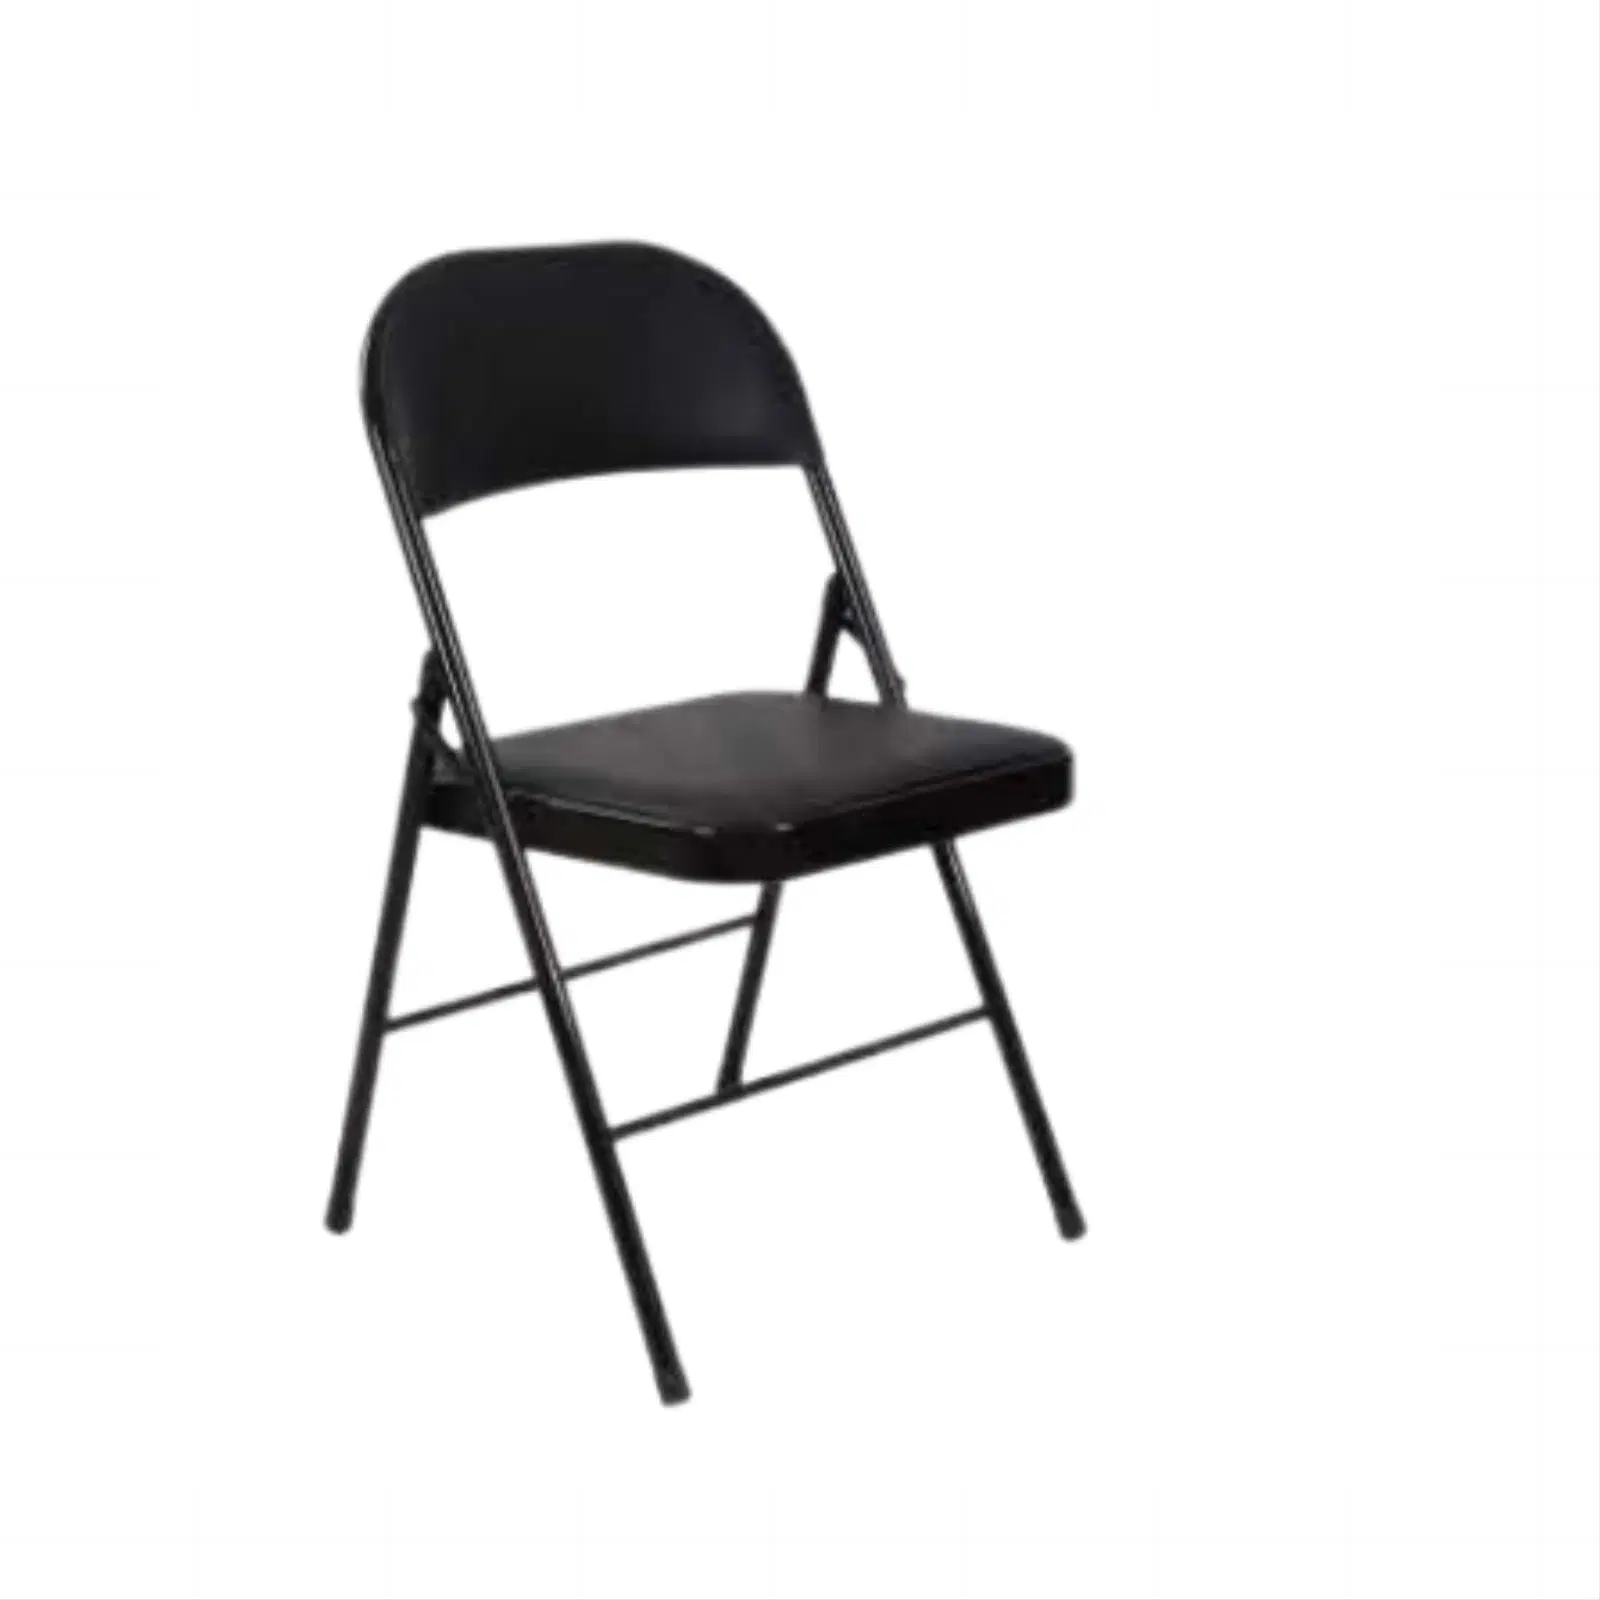 High-Quality Folding Chairs for Wedding Ceremonies